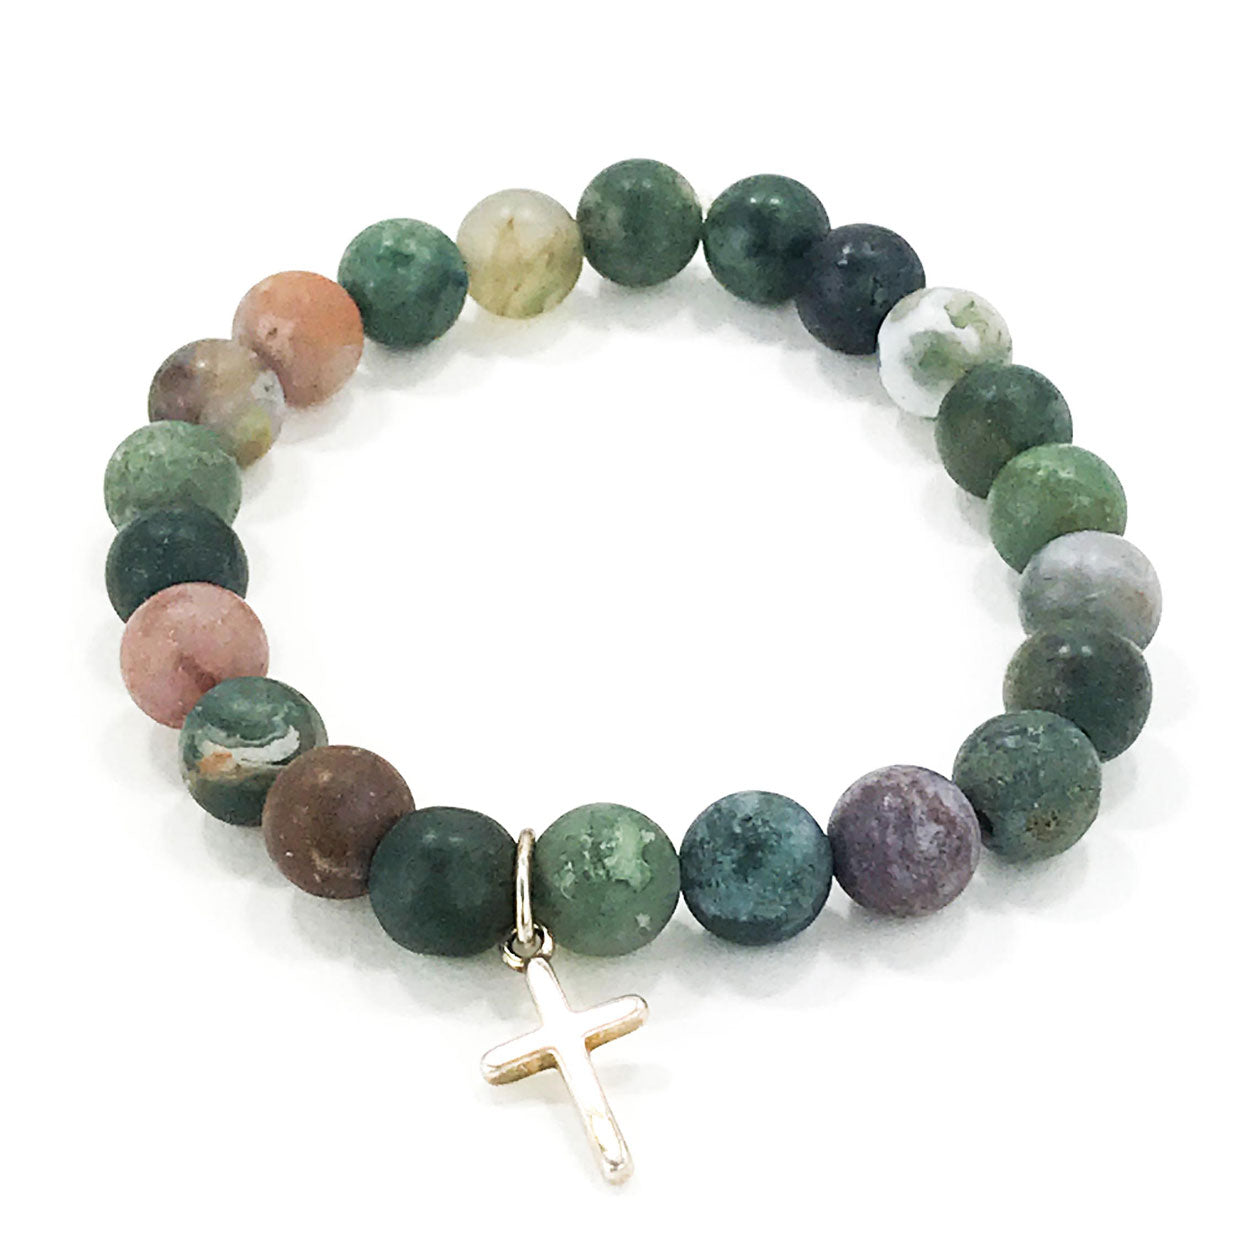 Stone Bracelet - Indian Agate with Sterling Silver Cross Charm